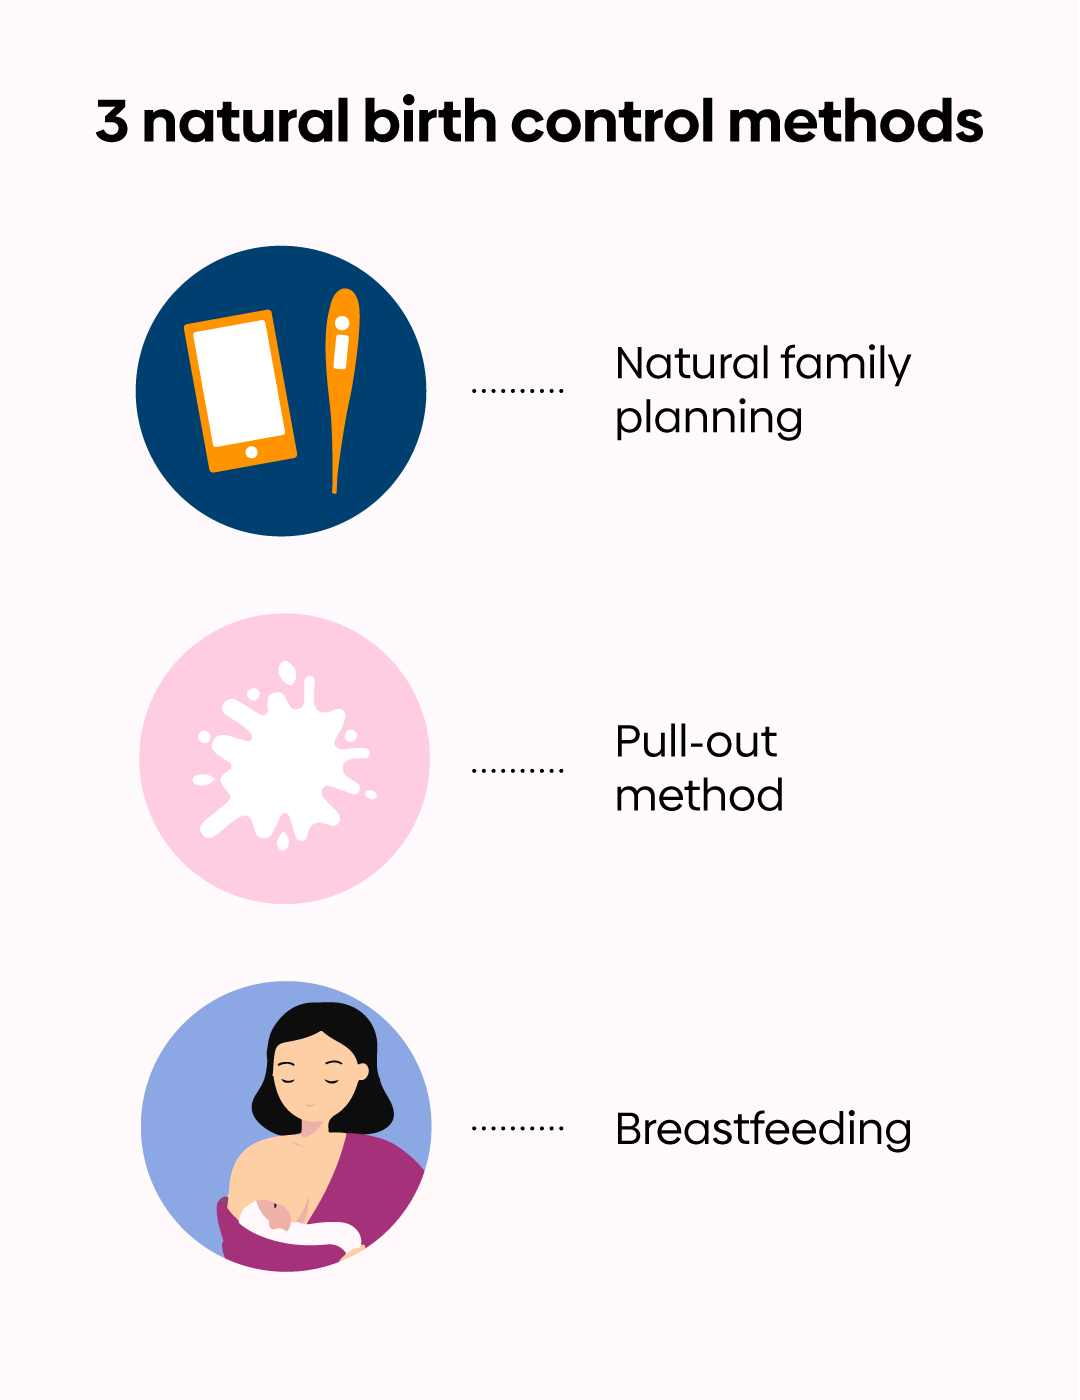 The 3 natural birth control methods